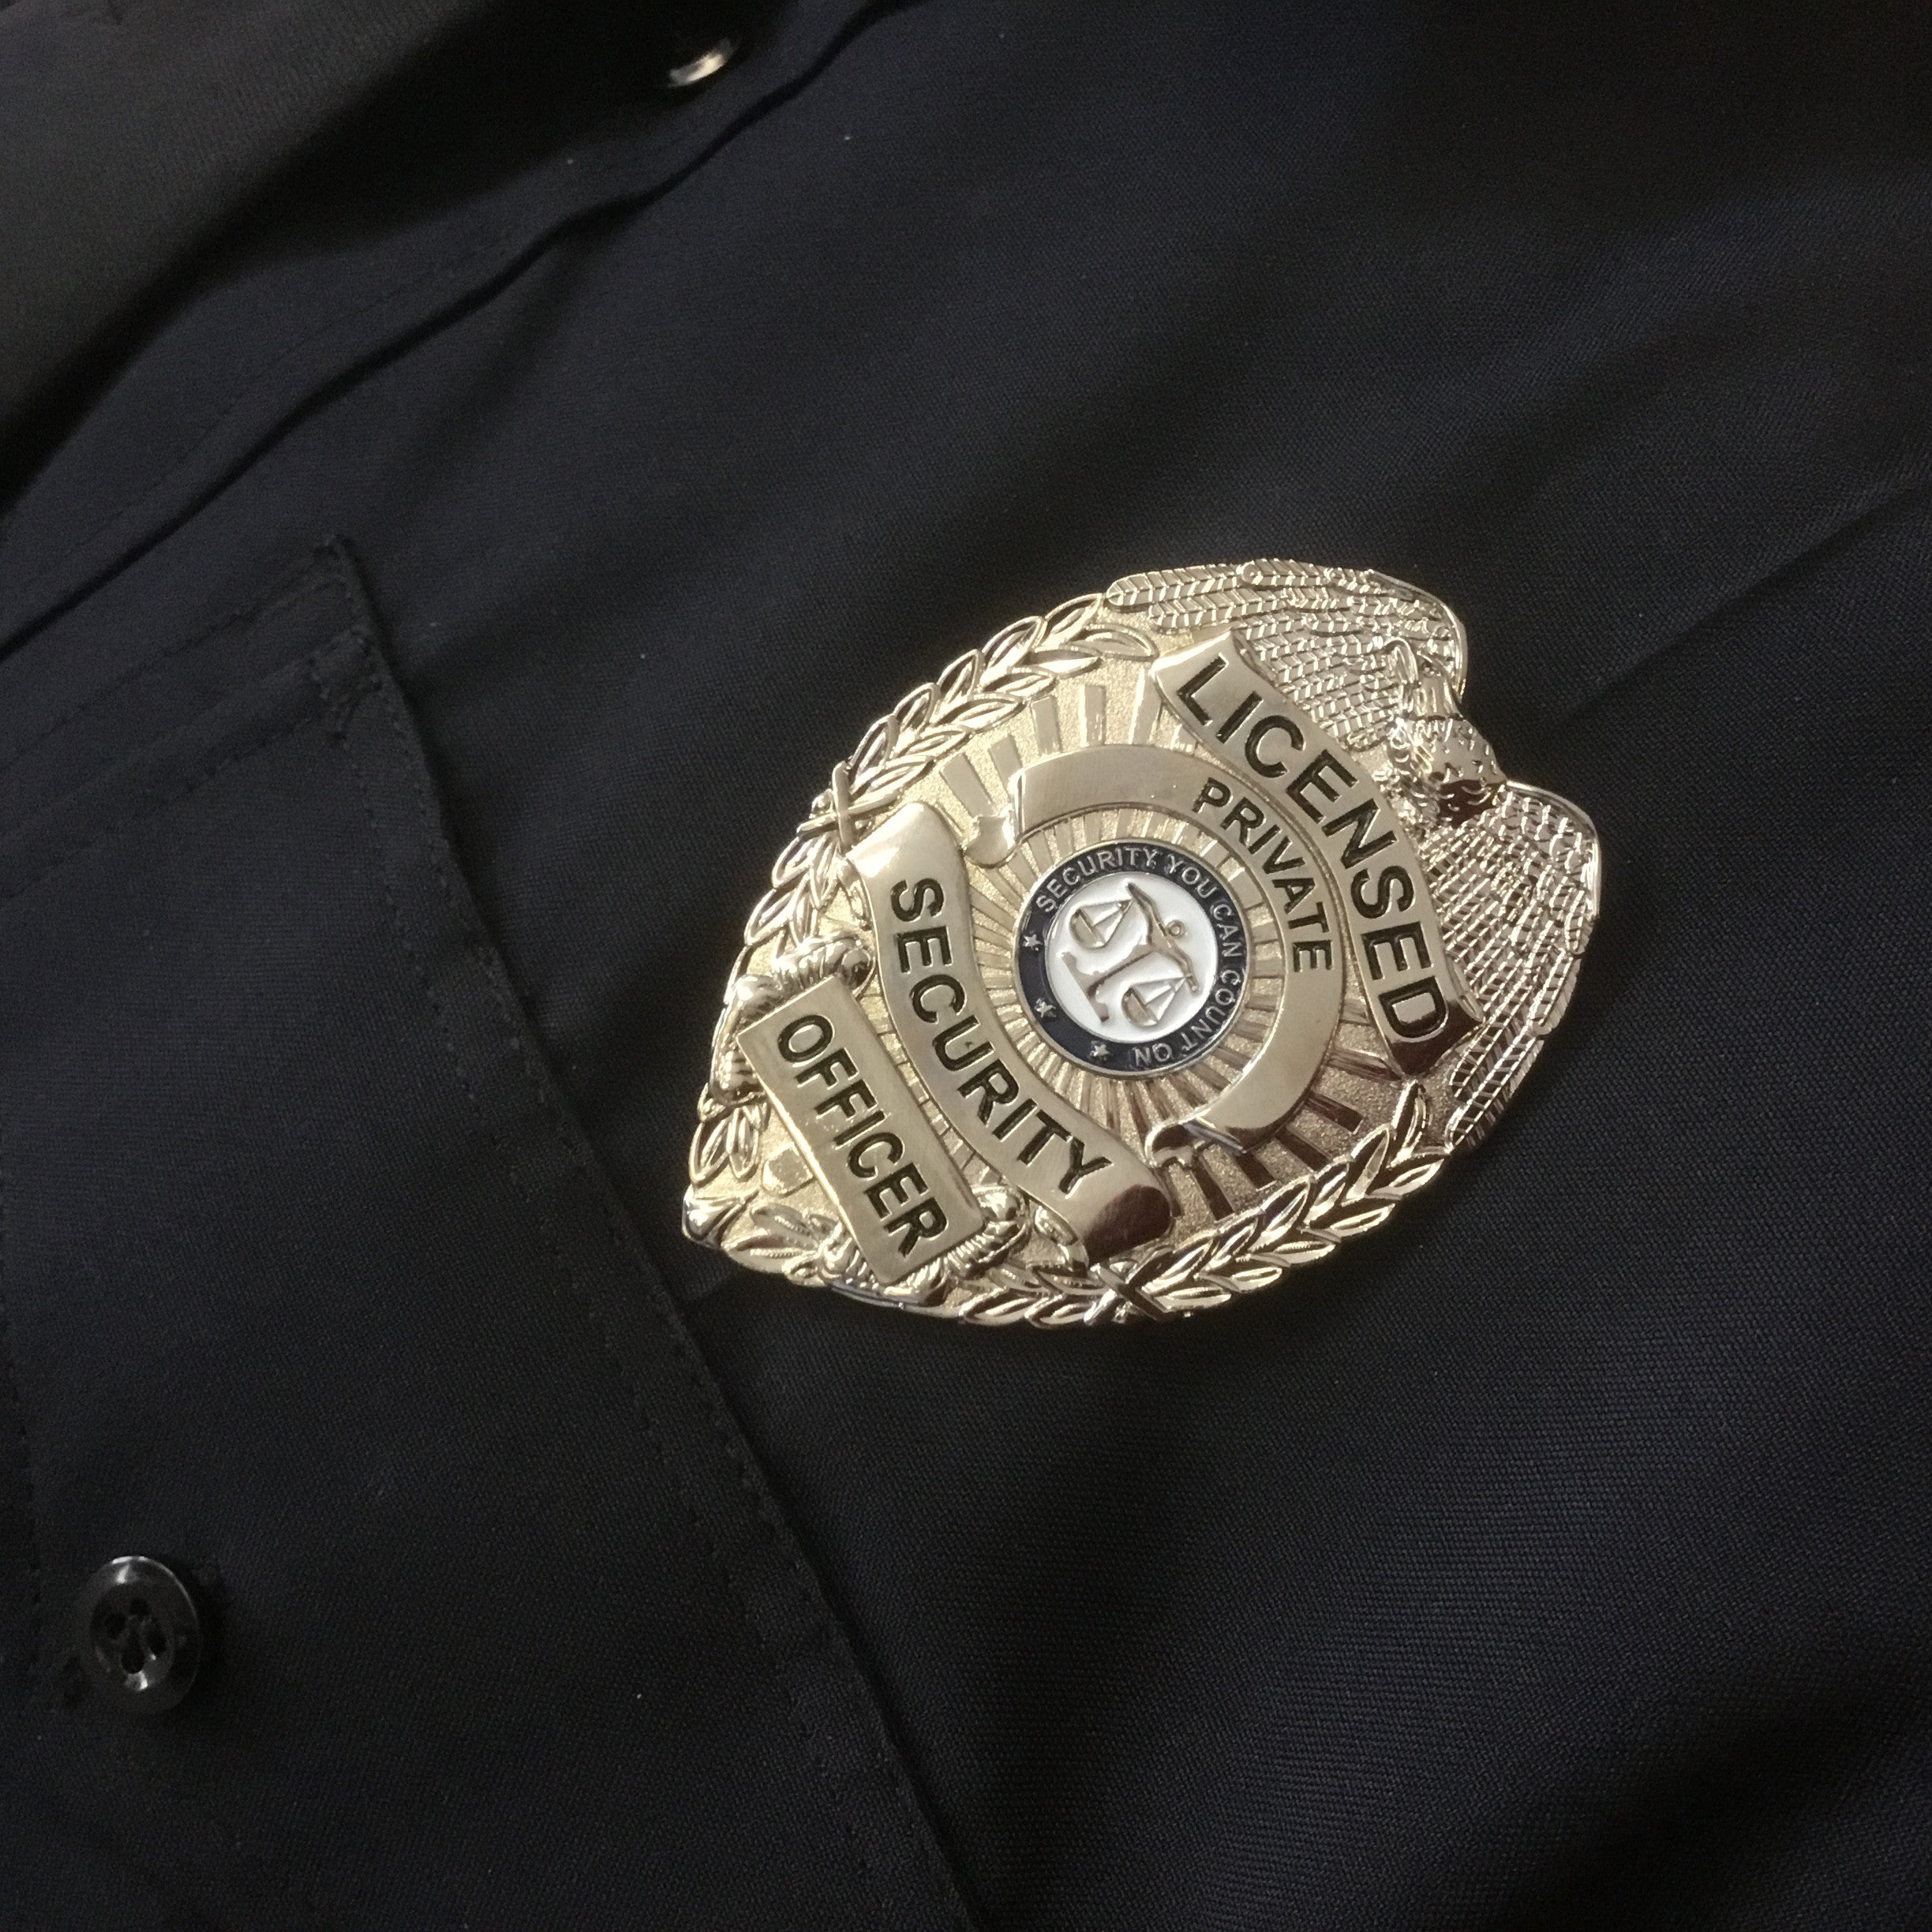 Licensed Private Security Officer Badge - Regional Uniform & Supply